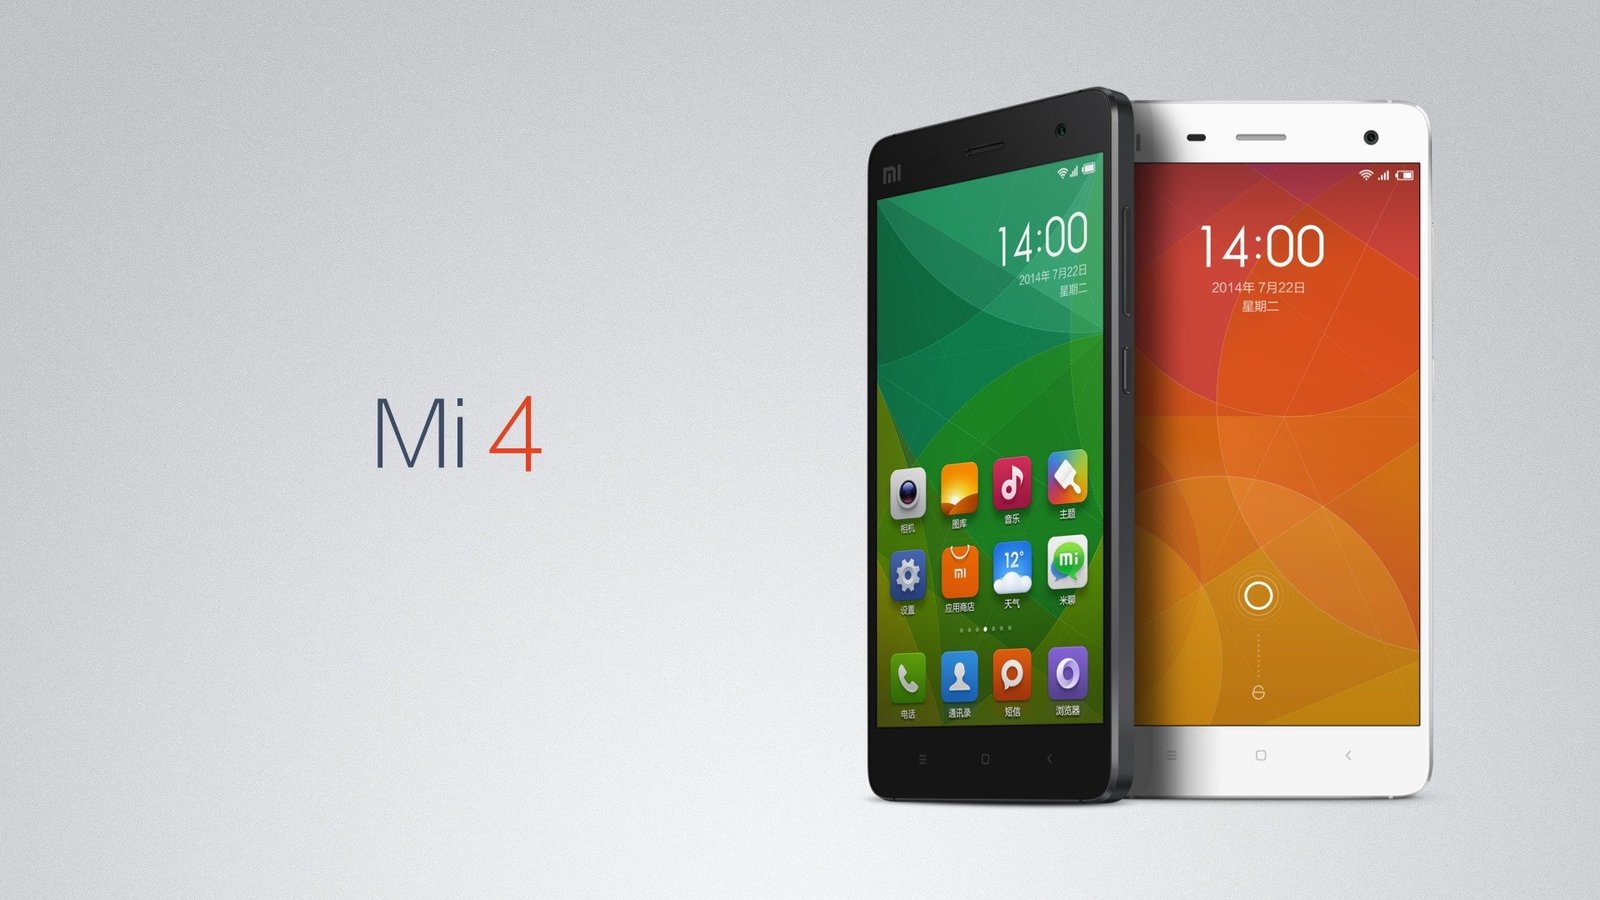 Xiaomi Mi4 will reportedly go on sale in early 2015